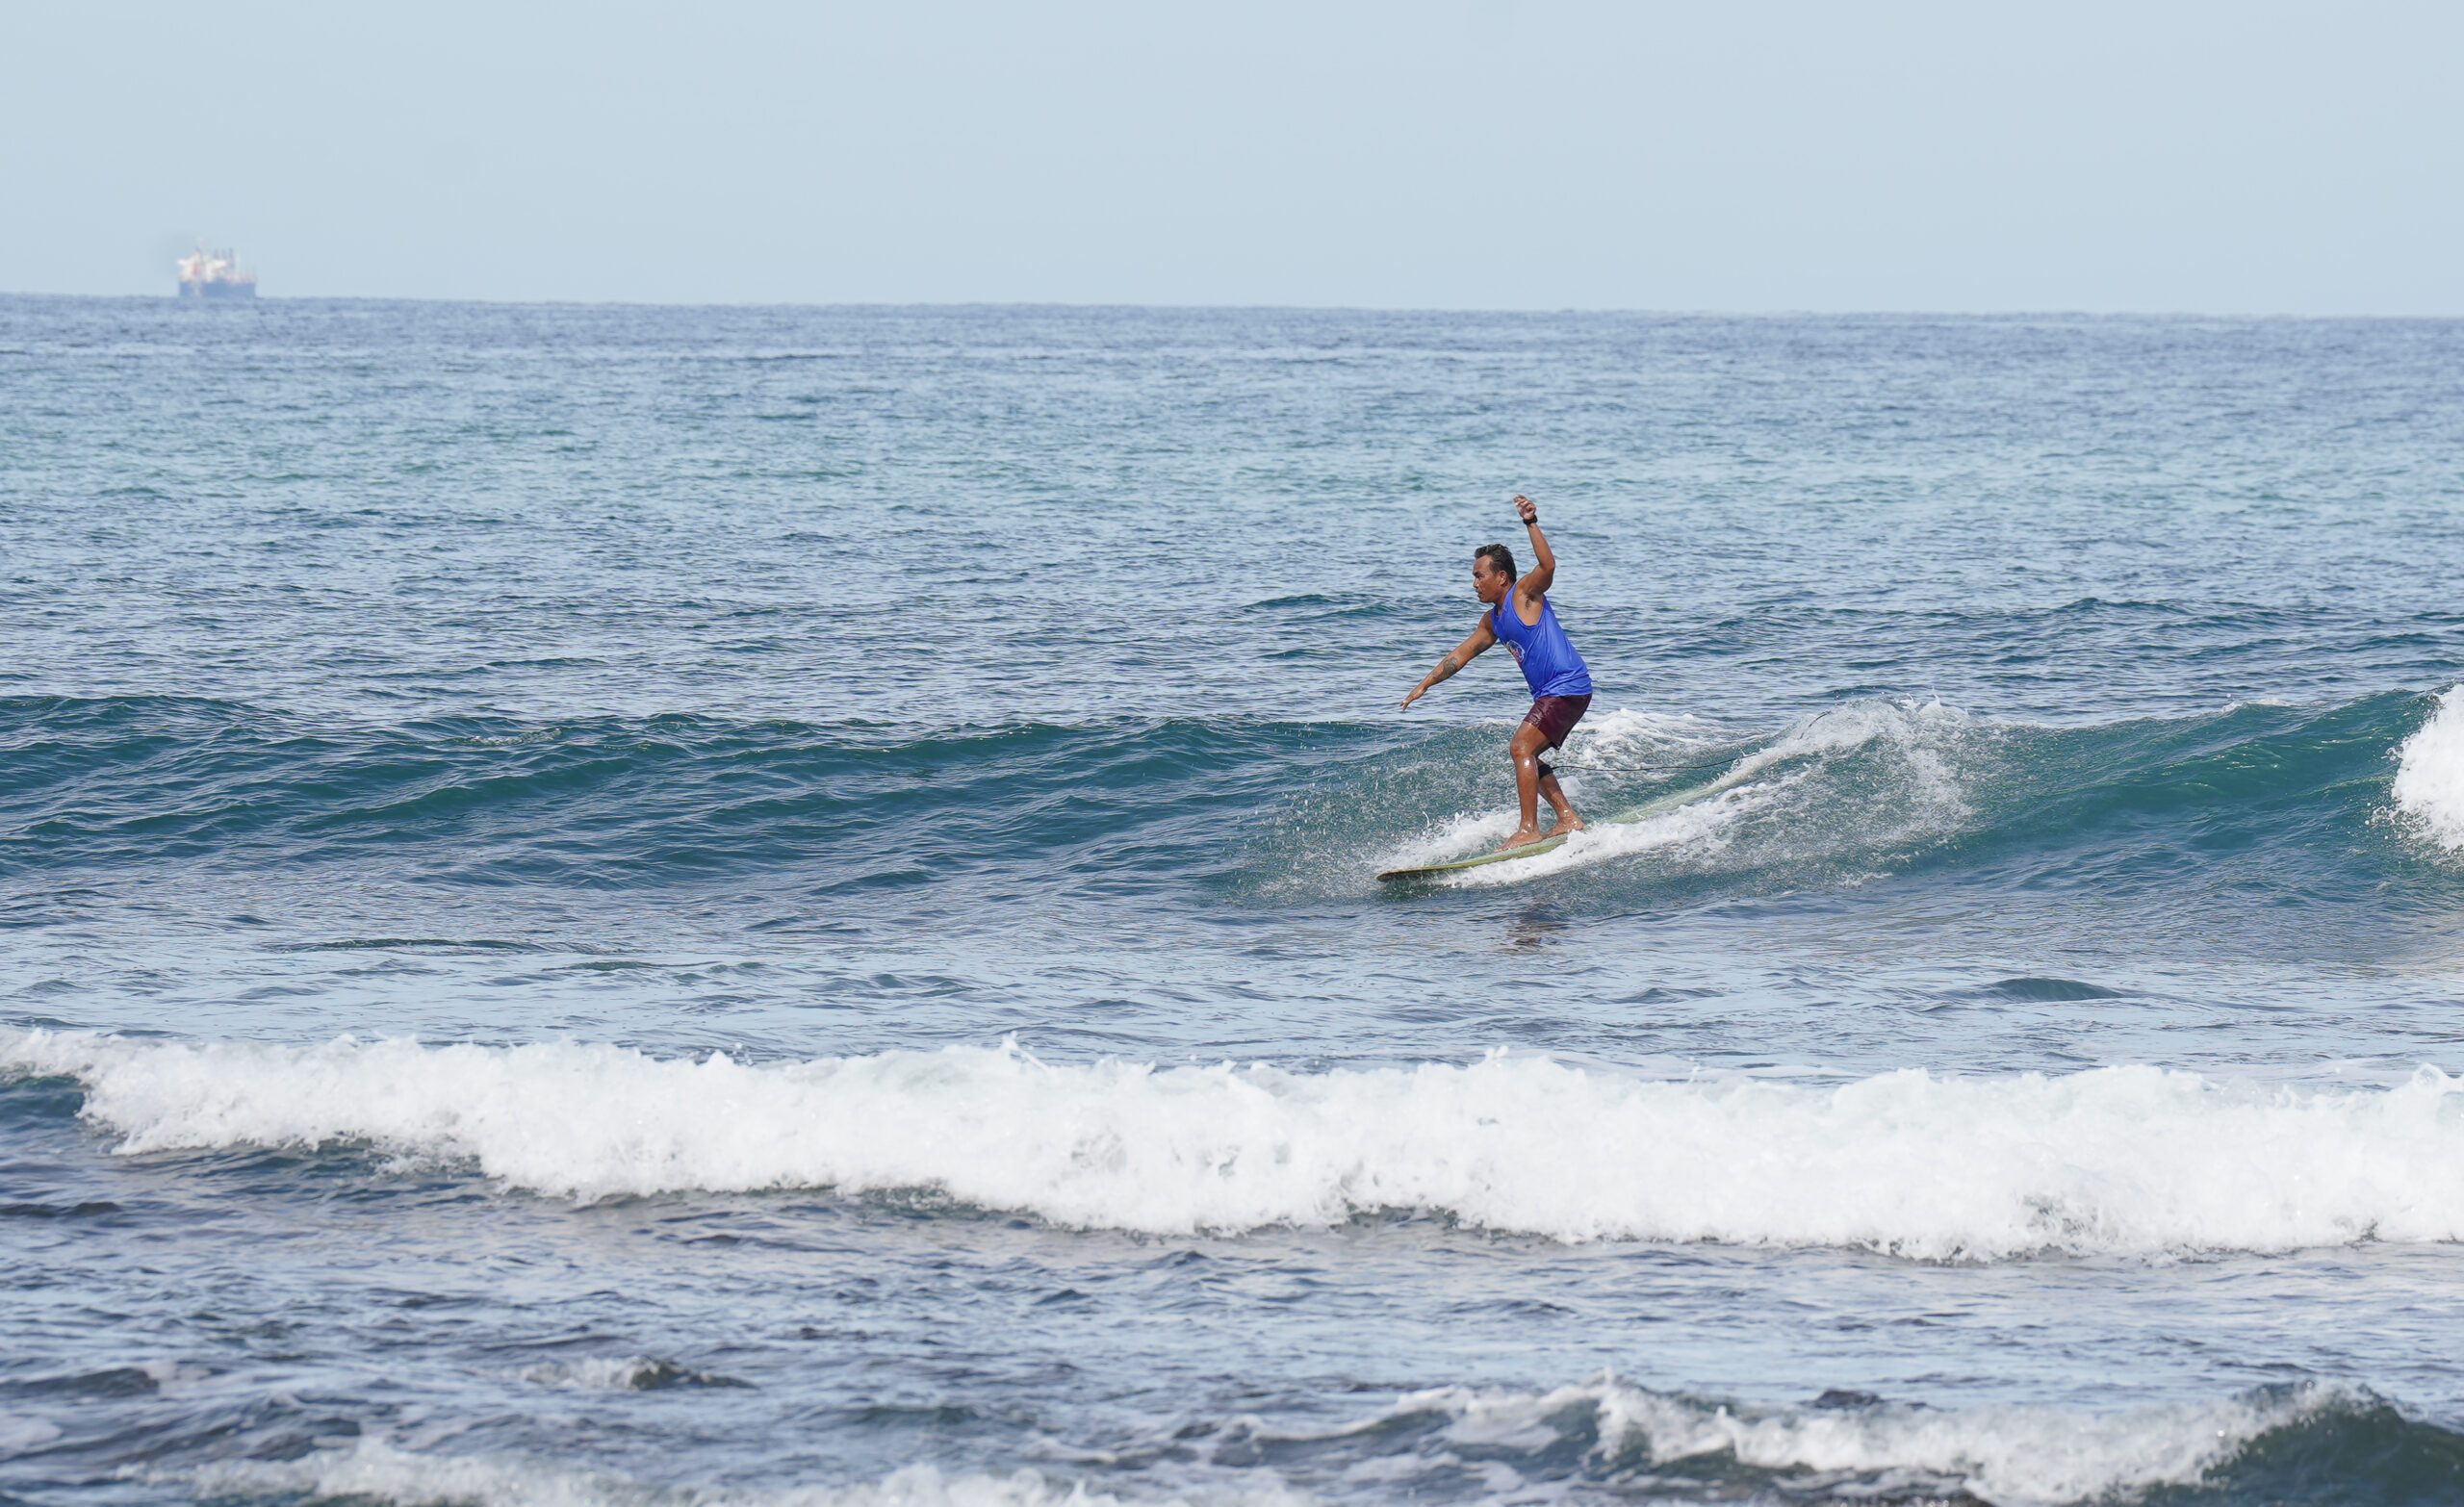 La Union tourism industry sees recovery from pandemic slump